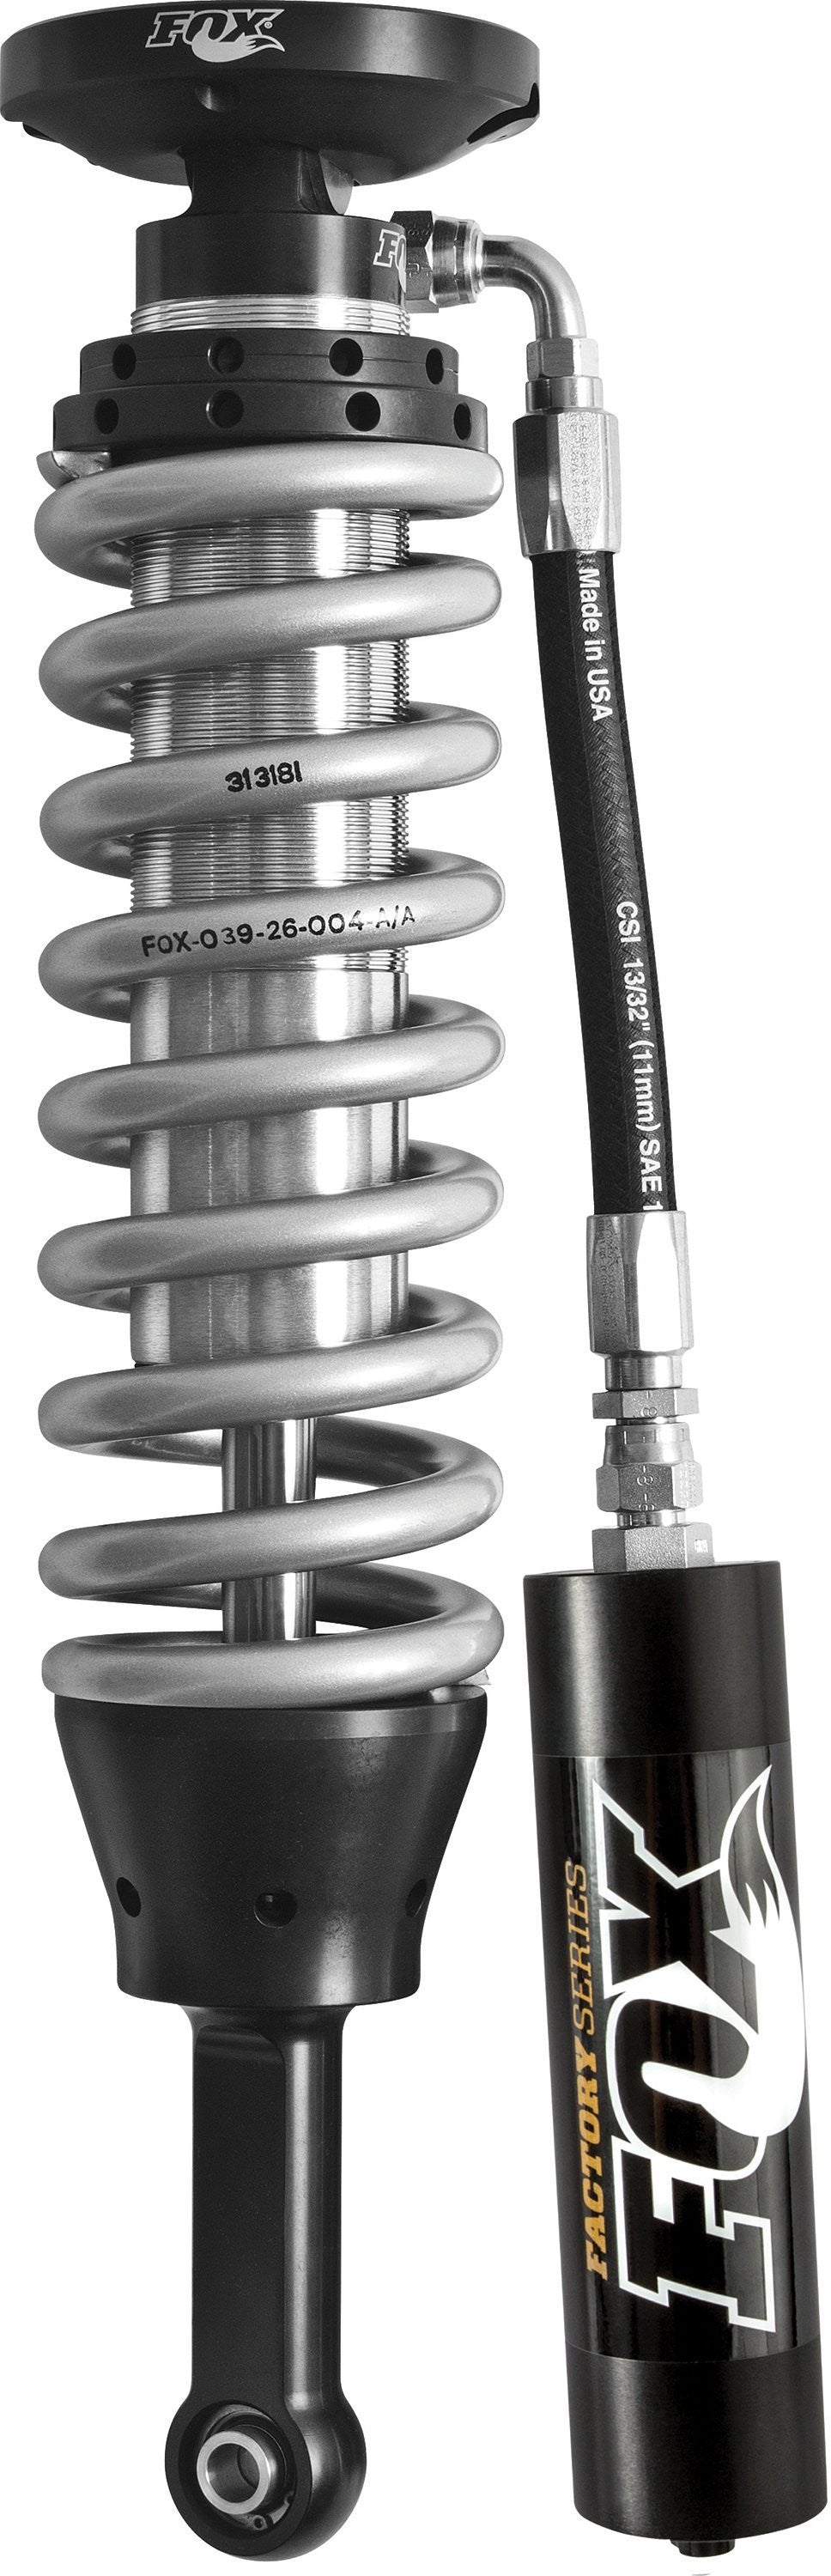 FACTORY RACE SERIES 2.5 COIL-OVER RESERVOIR SHOCK (PAIR) Lift: 0-2; Without Air Ride 2009-2010 Dodge Ram 1500 FOX-883-02-080 - 2.5 COIL-OVER SHOCKS - FOX Offroad Shocks - Texas Complete Truck Center